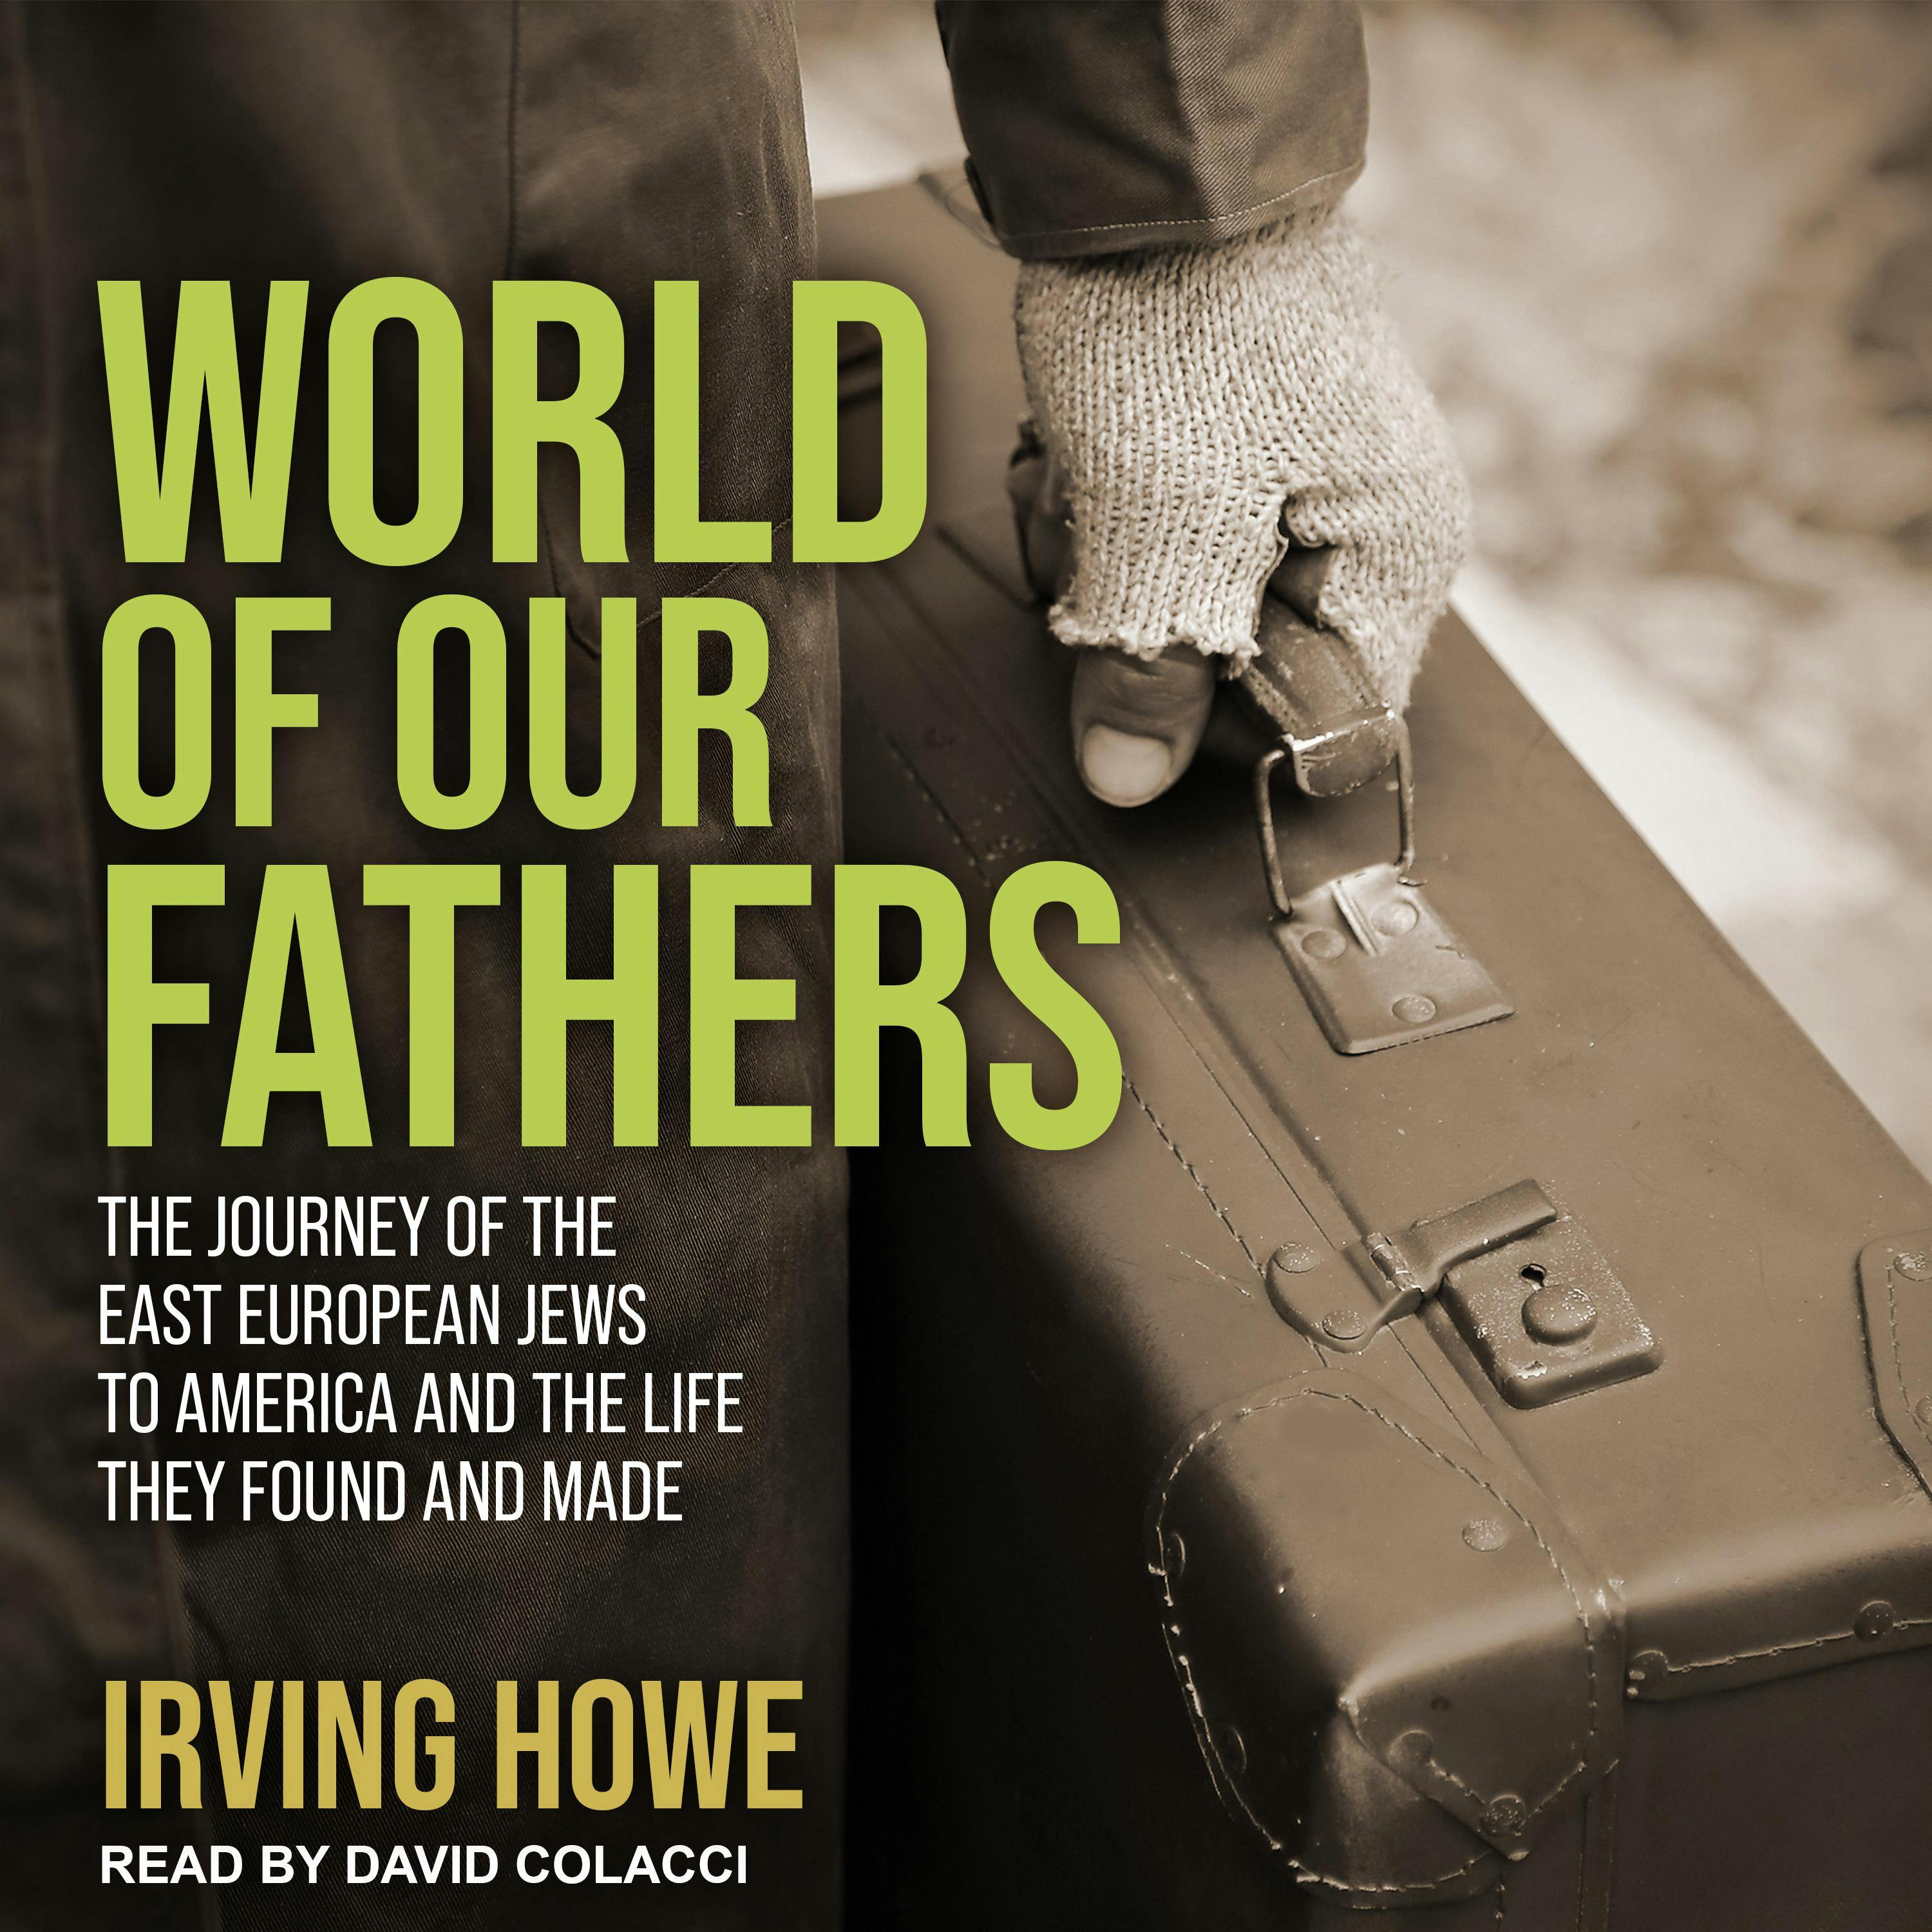 World of Our Fathers: The Journey of the East European Jews to America and the Life They Found and Made - Irving Howe